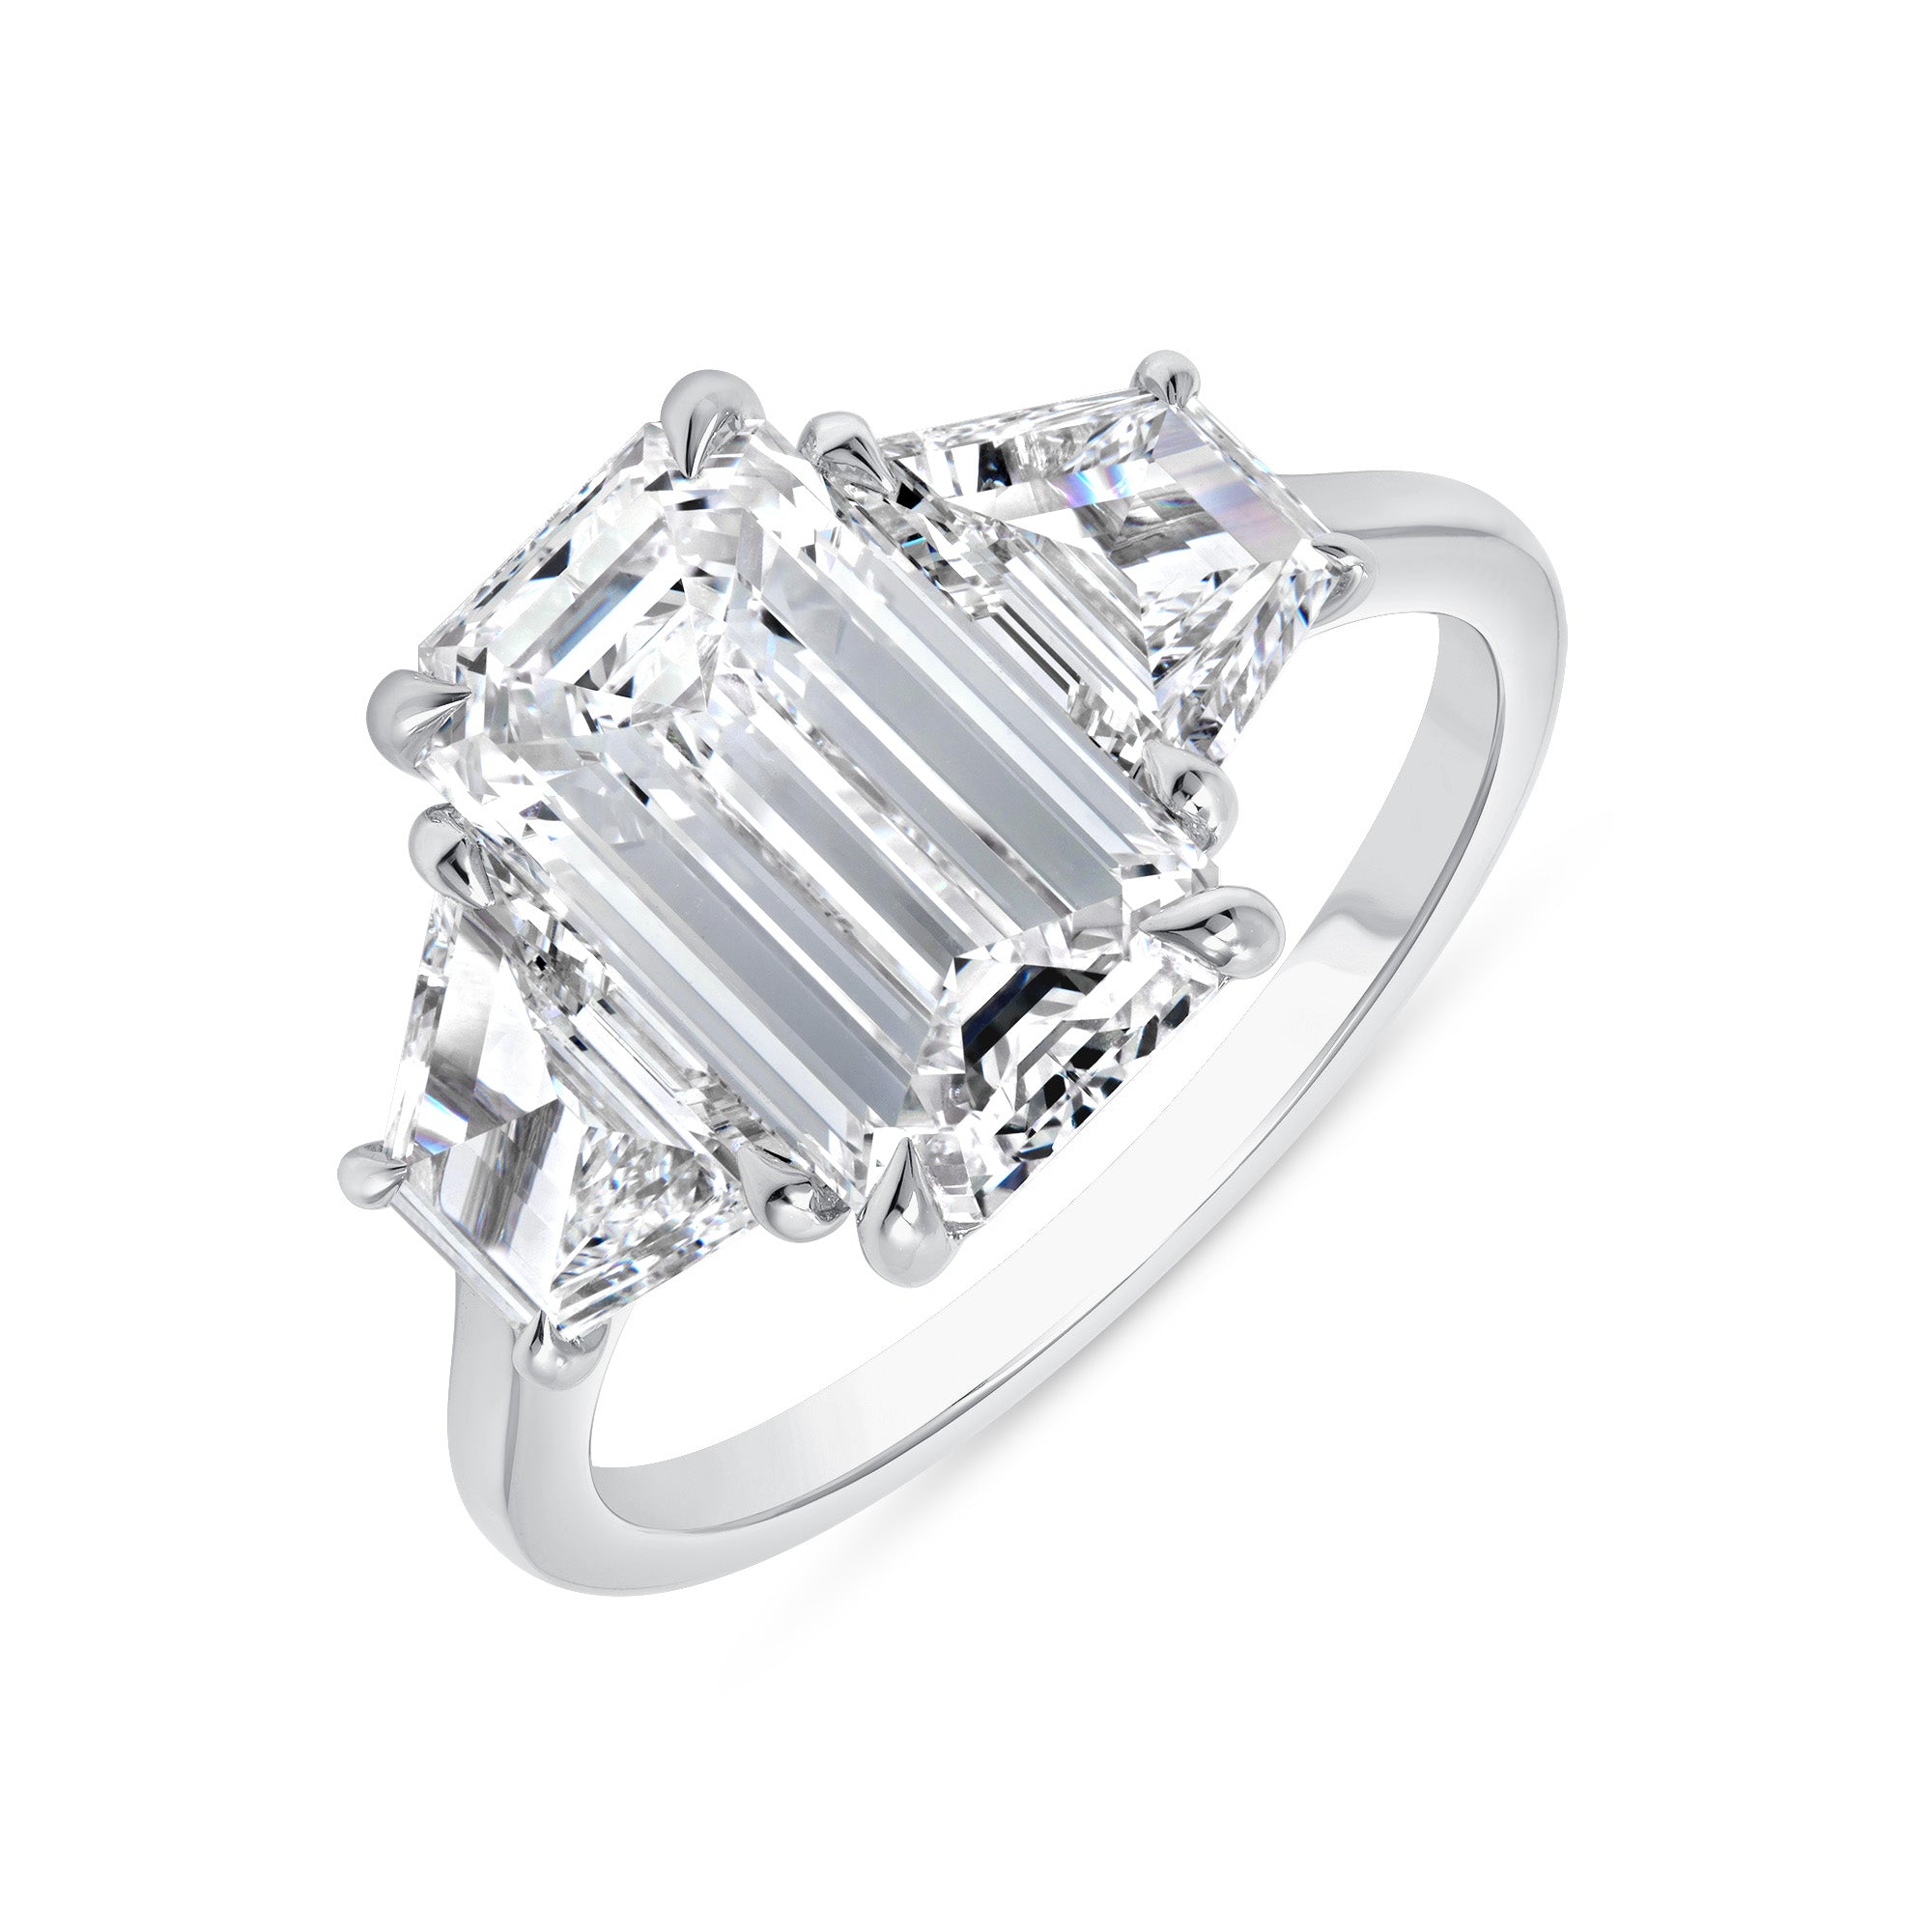 Emerald Cut Diamond Center Stone and Two Trapezoid Shape On the Side 18K White Gold Ring